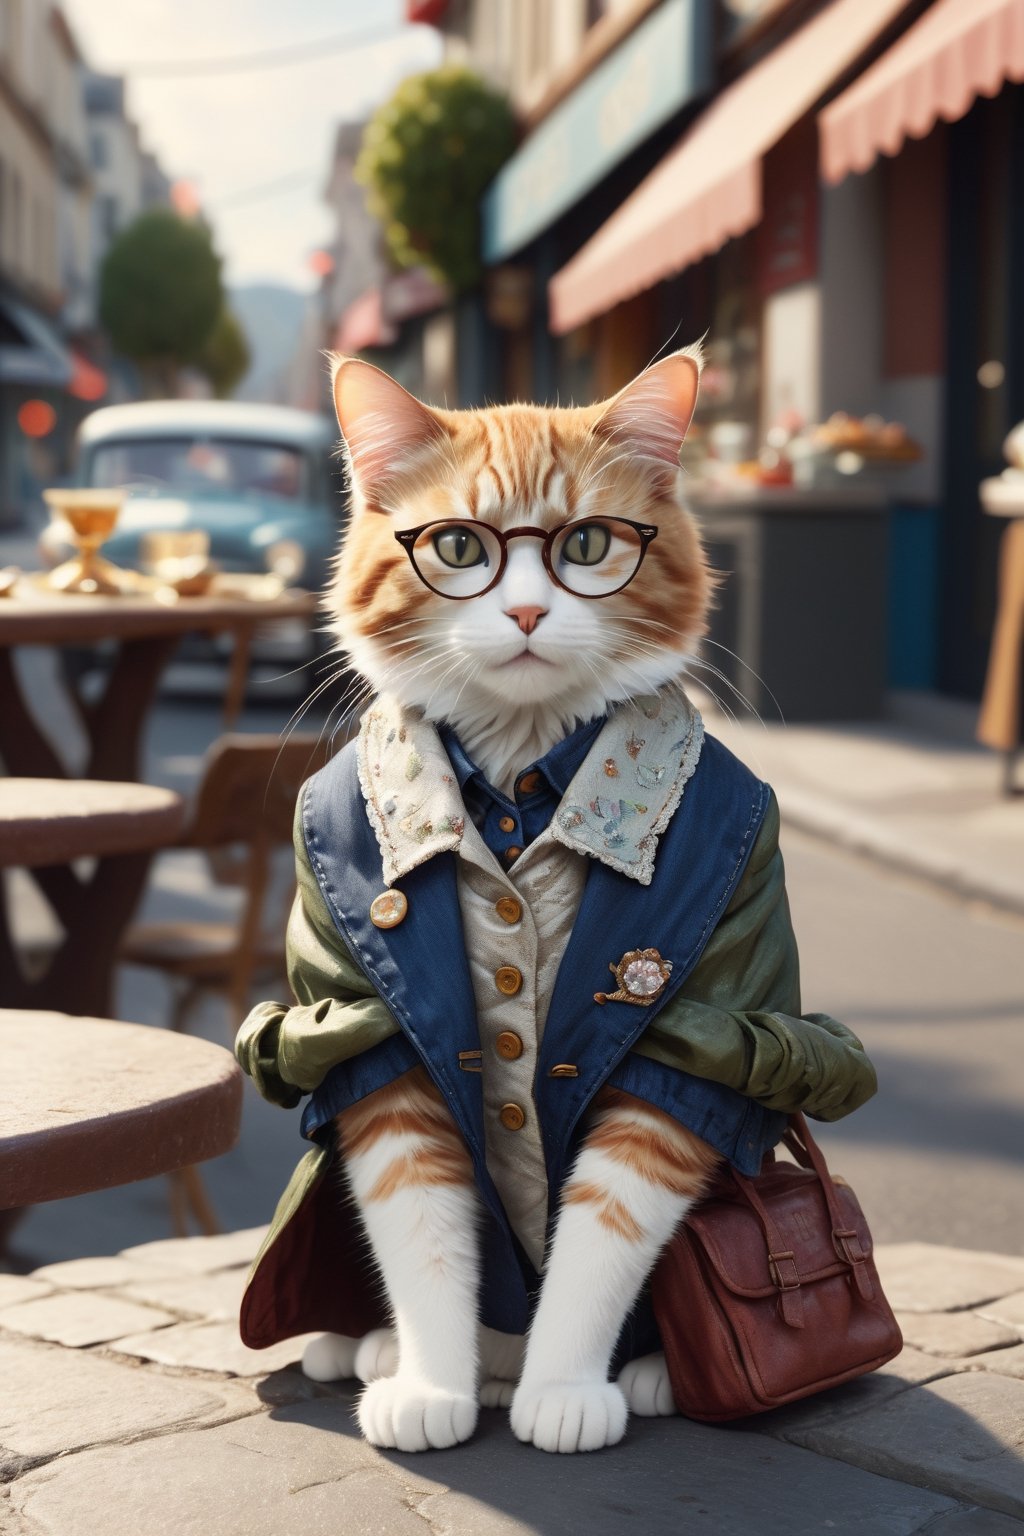 Envision an adorable and playful scene: A cat sits in a street front of a foodtable, adorned with glasses and a vintage jacket, resembling an intellectual little princess